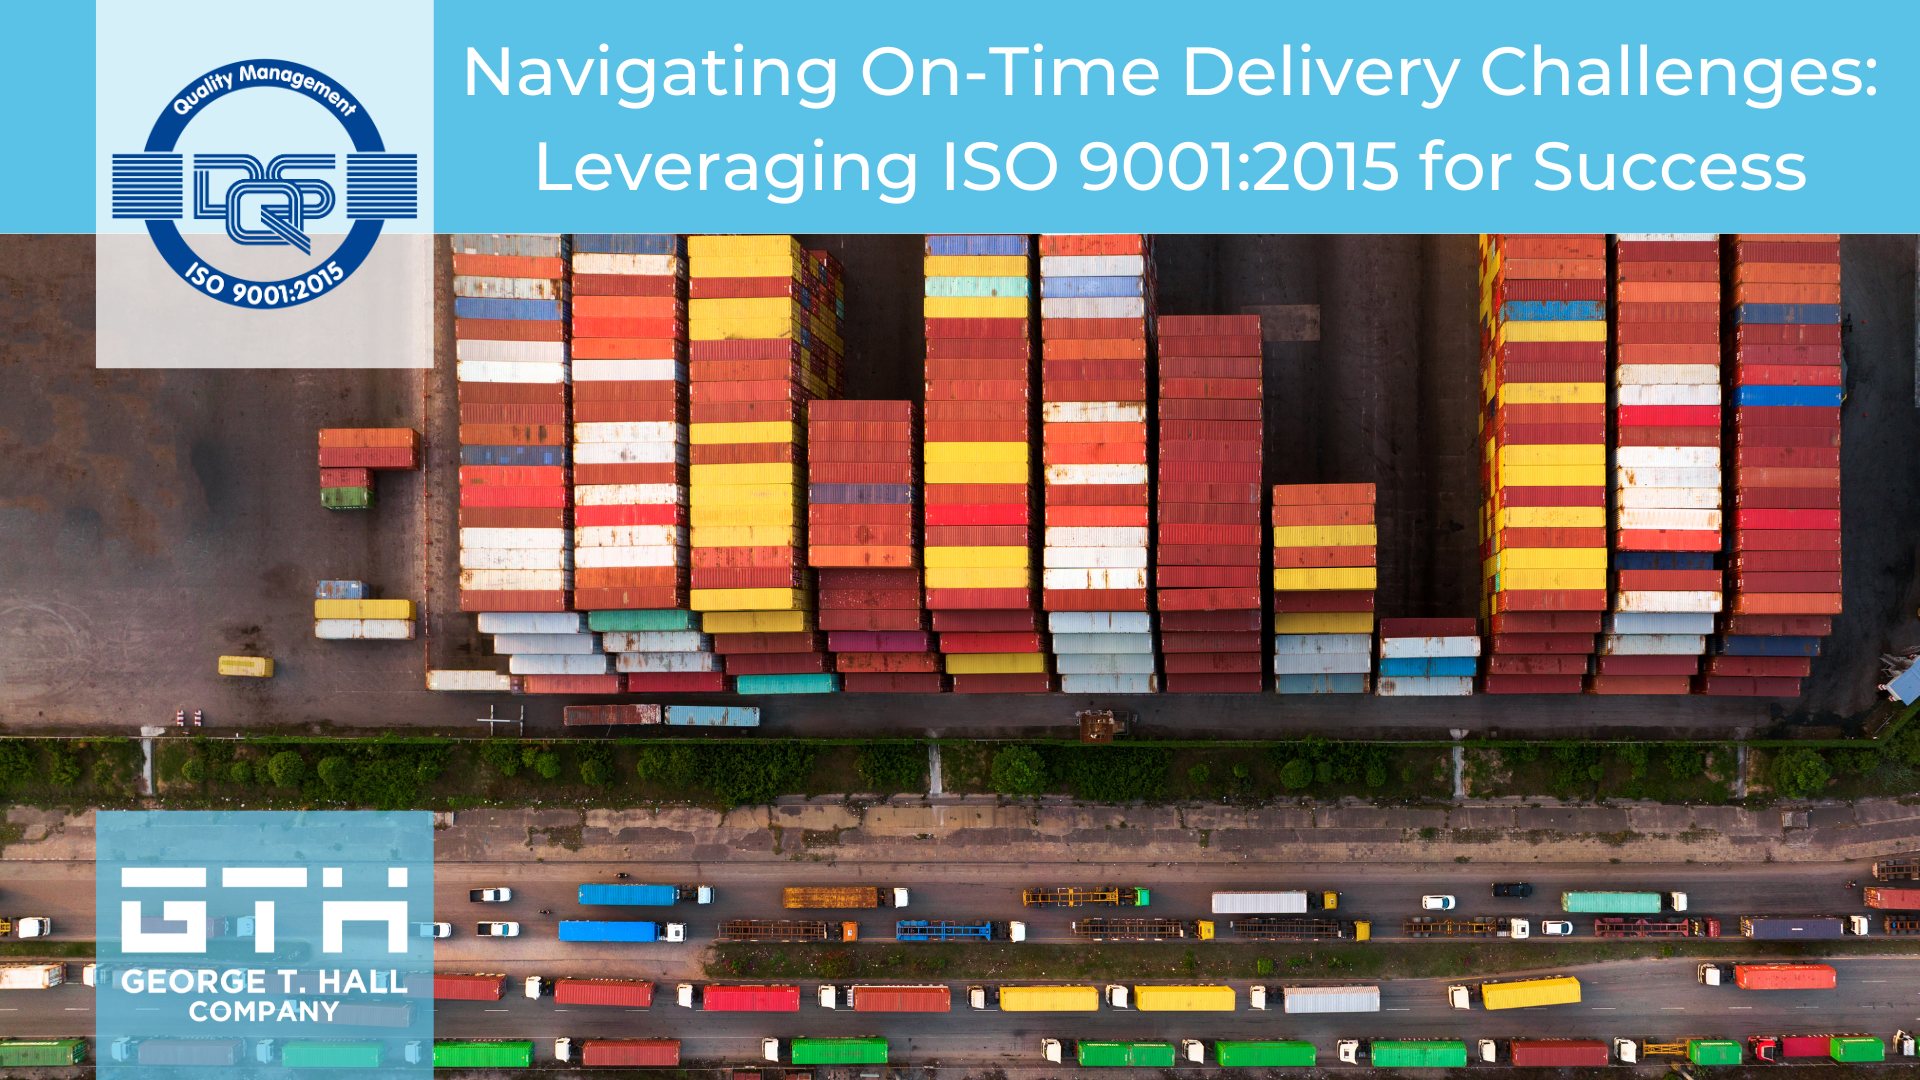 Navigating On-Time Delivery Challenges: Leveraging ISO 9001:2015 for Success